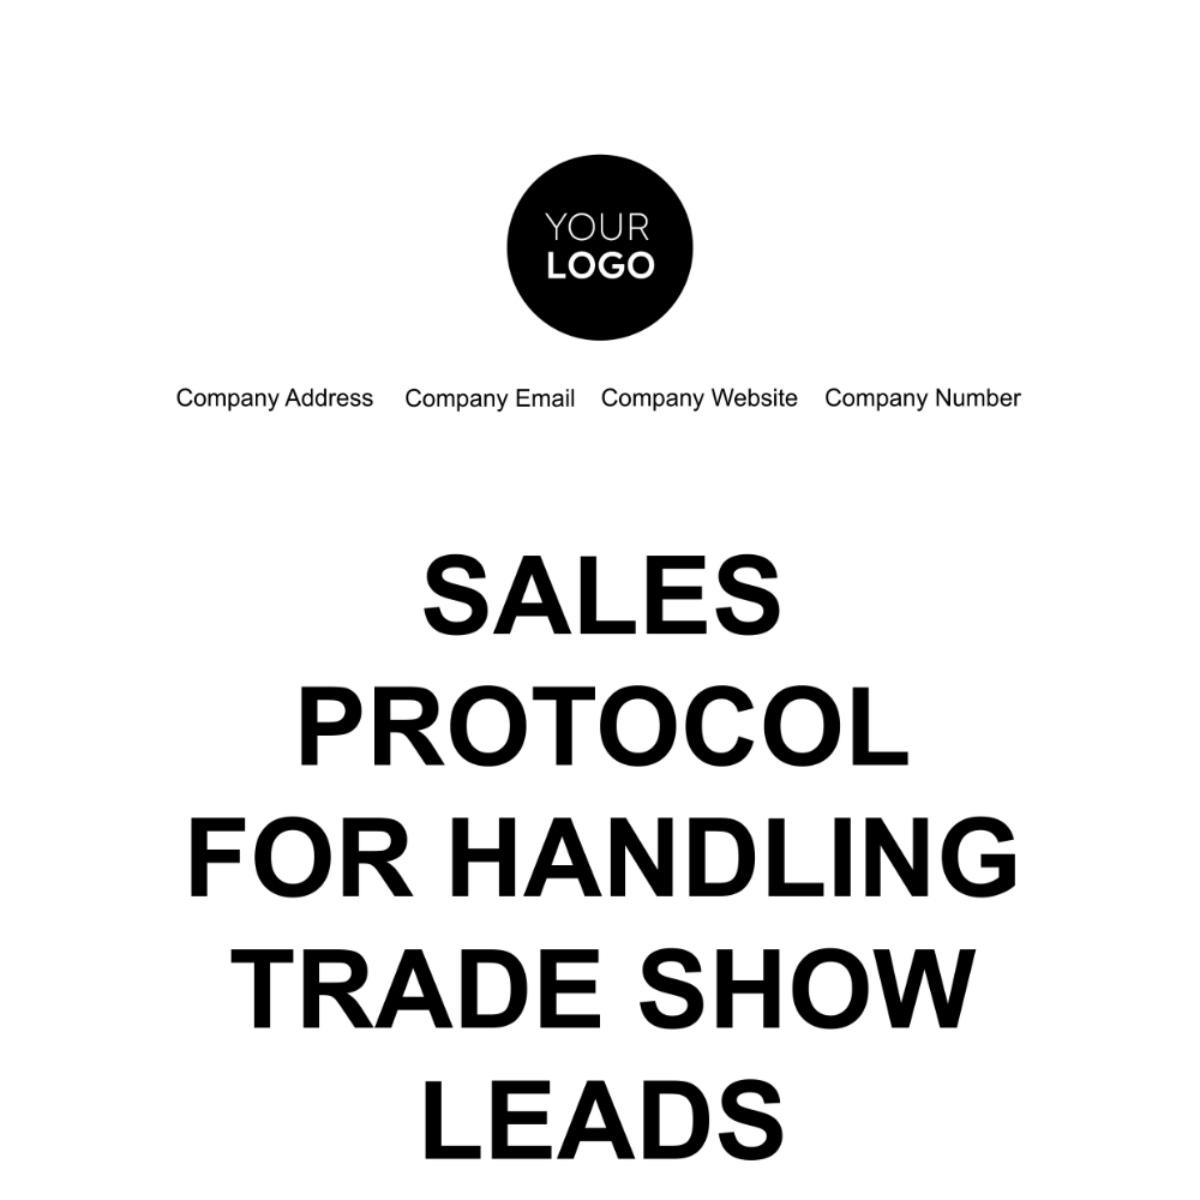 Free Sales Protocol for Handling Trade Show Leads Template